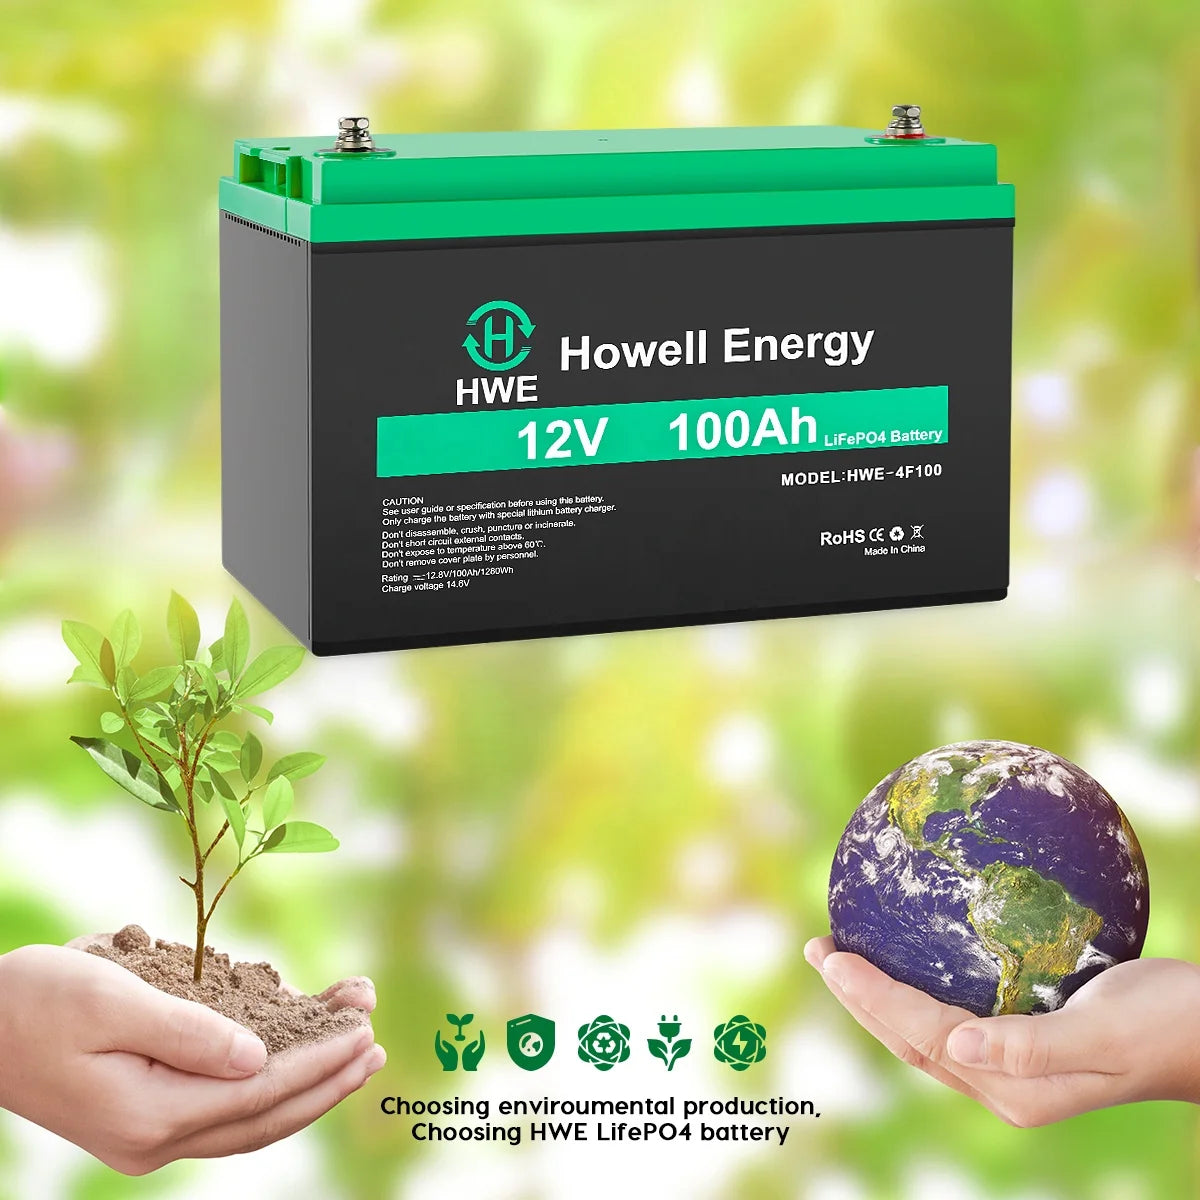 Howell 12v 100ah Battery, Precautions required: read safety specs, follow charging instructions, and store properly to avoid damage.